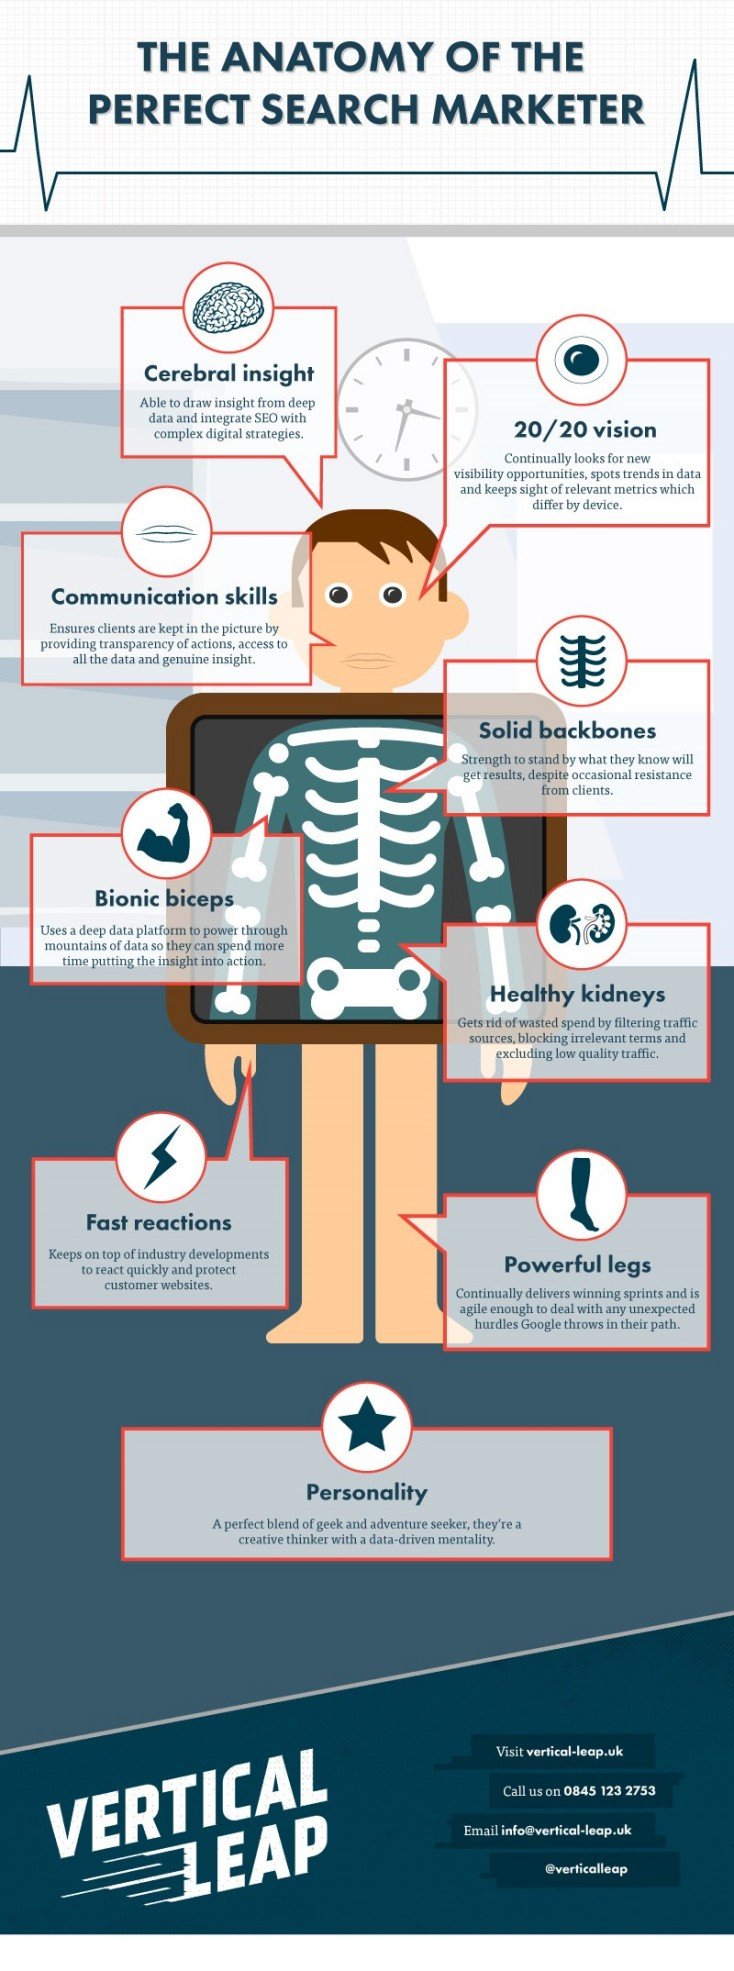 Anatomy-of-the-perfect-search-marketer